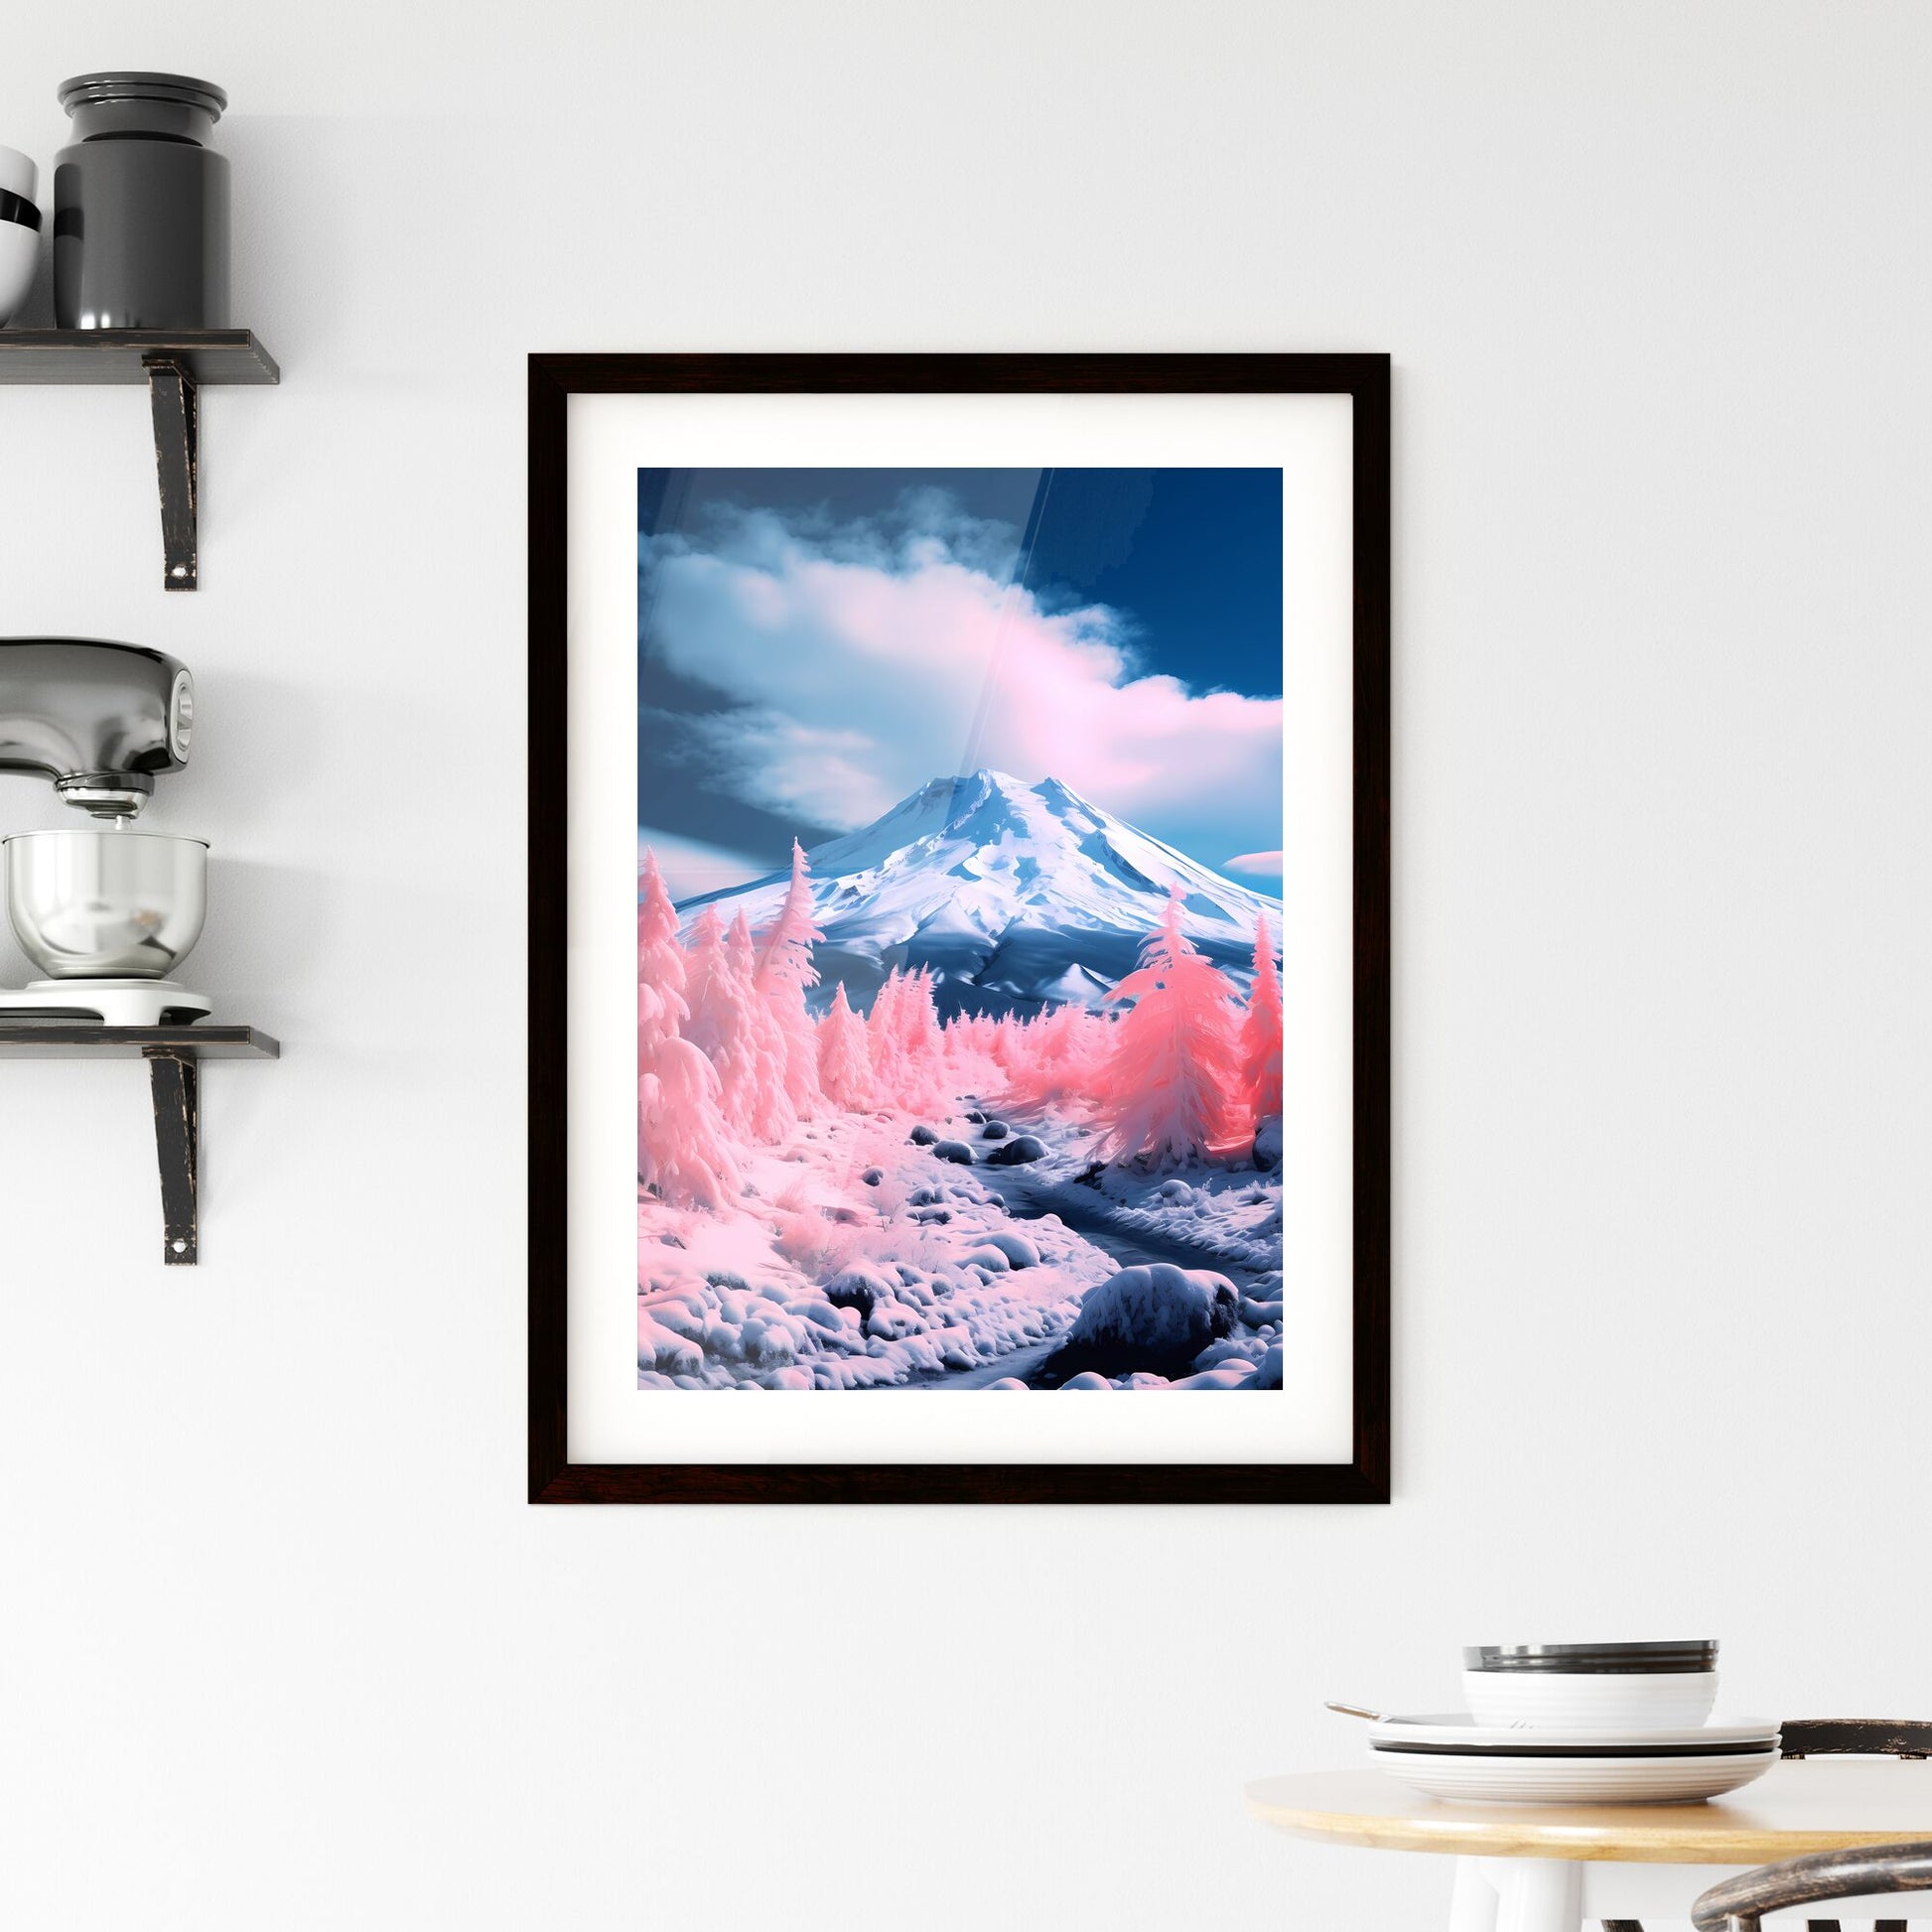 A Poster of A magnificent snow mountain - A Snowy Mountain With Trees Default Title